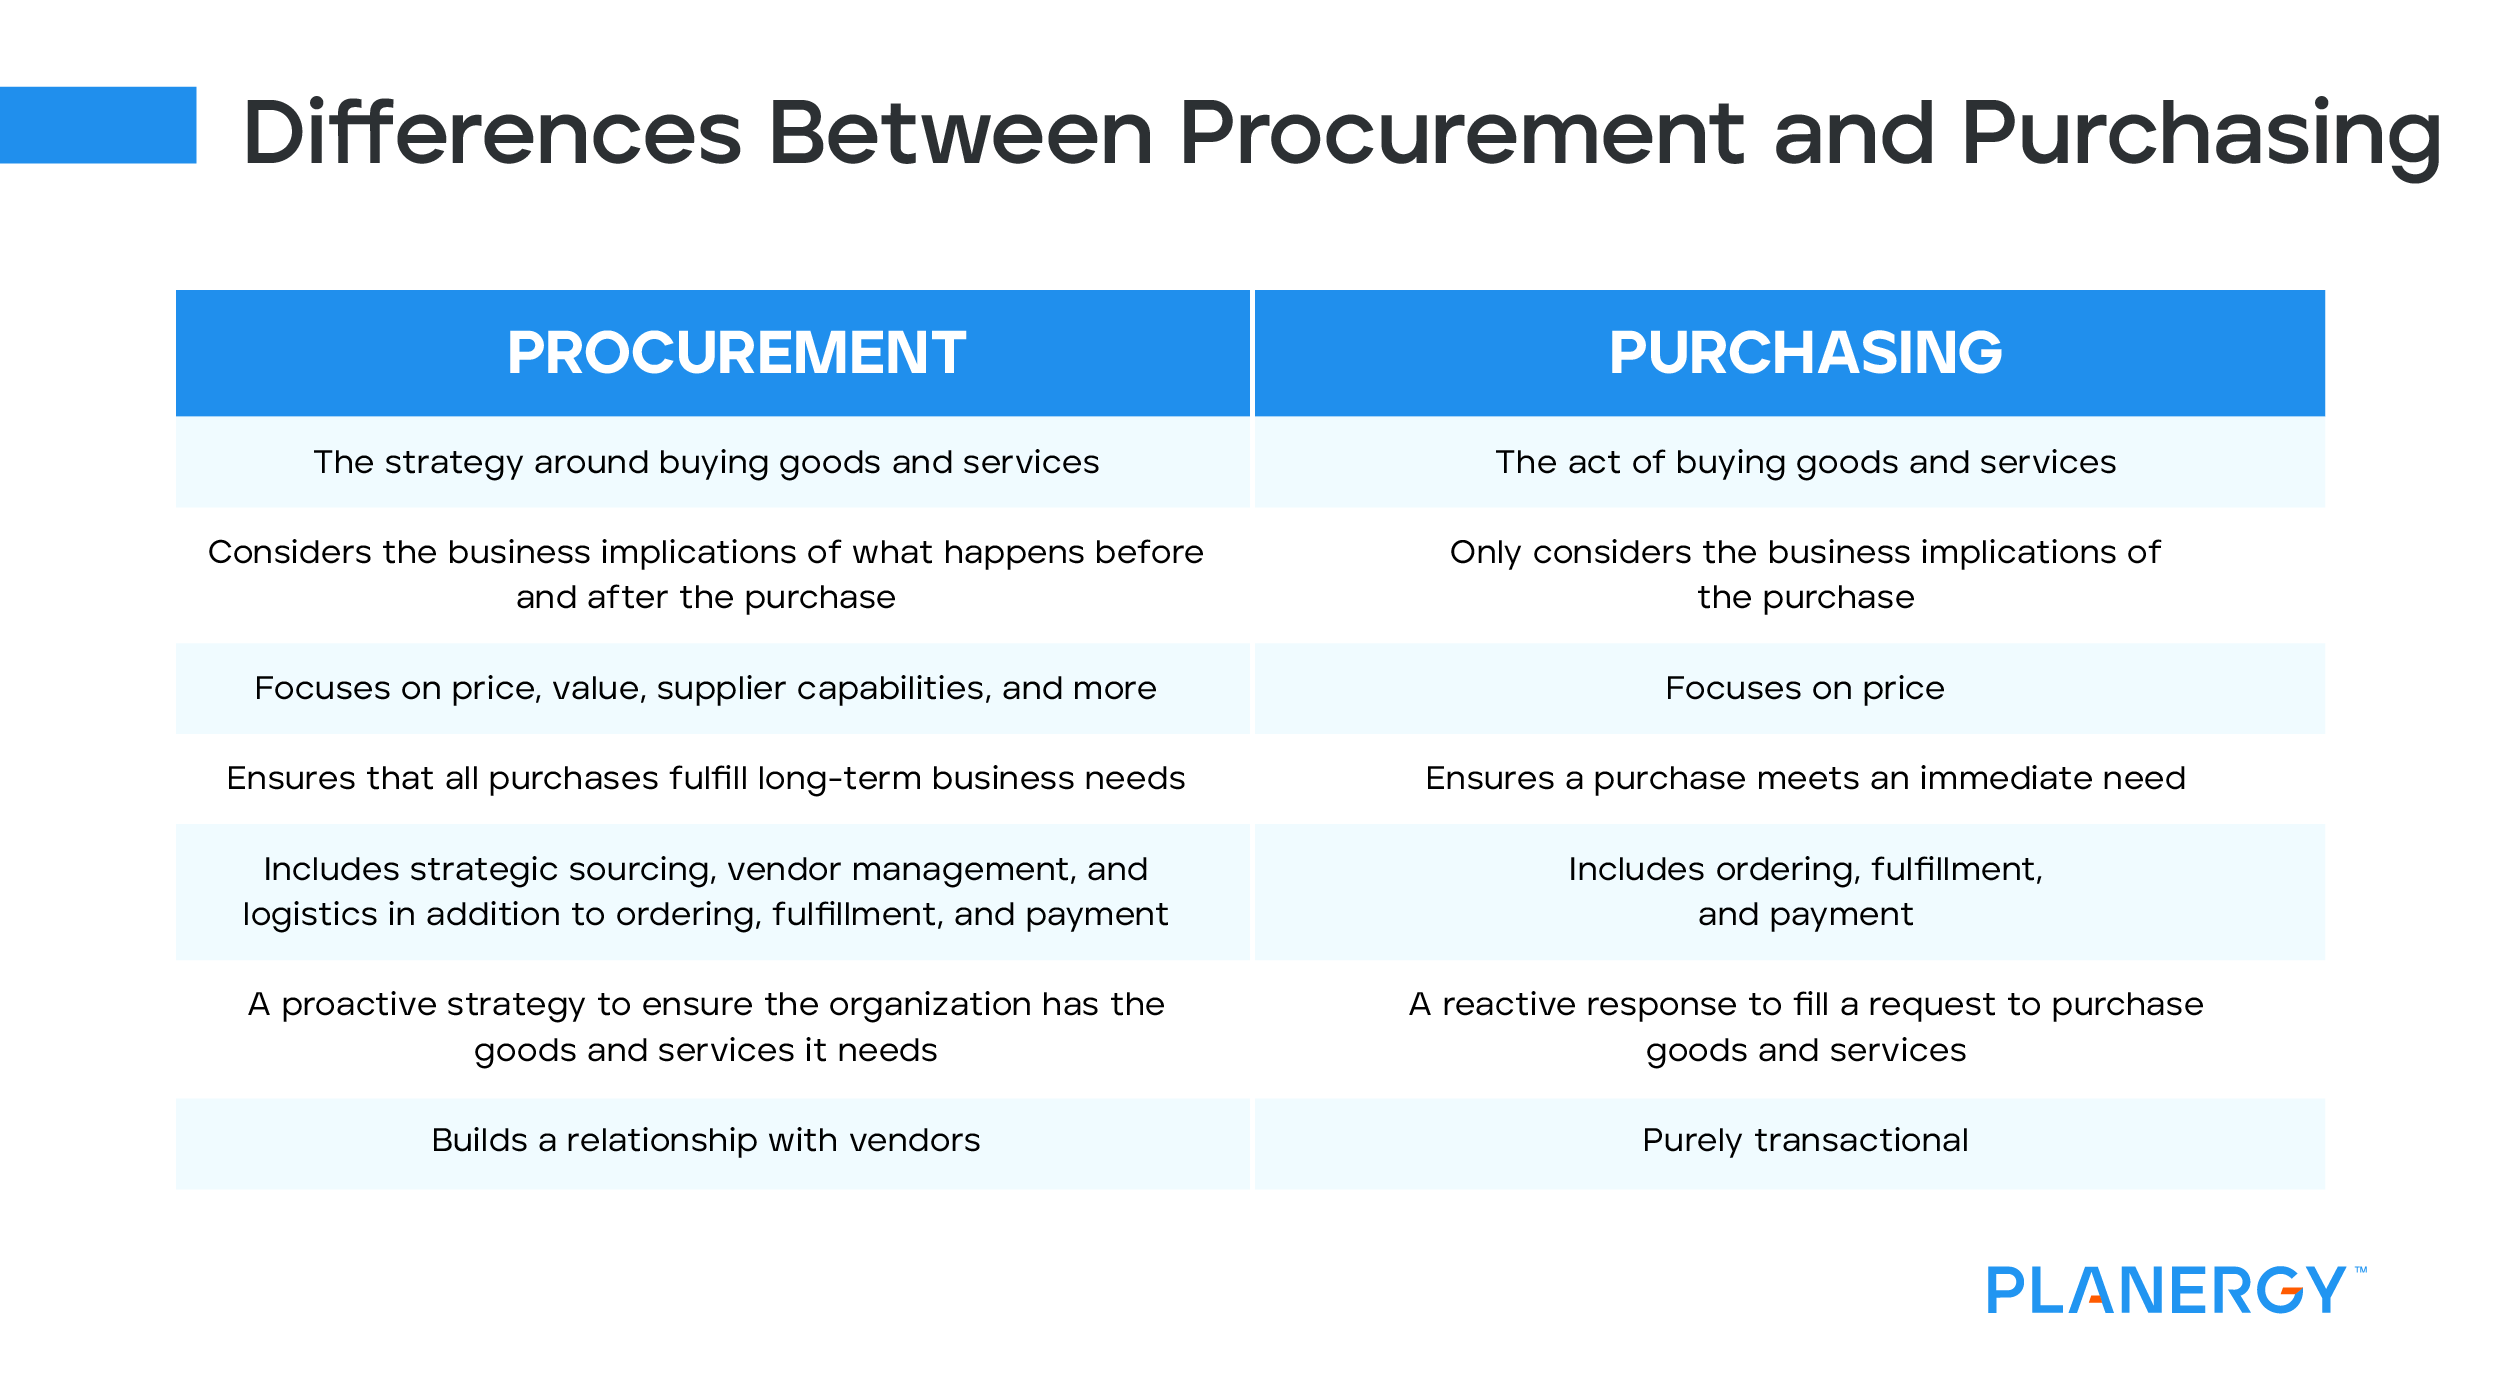 Differences Between Procurement and Purchasing